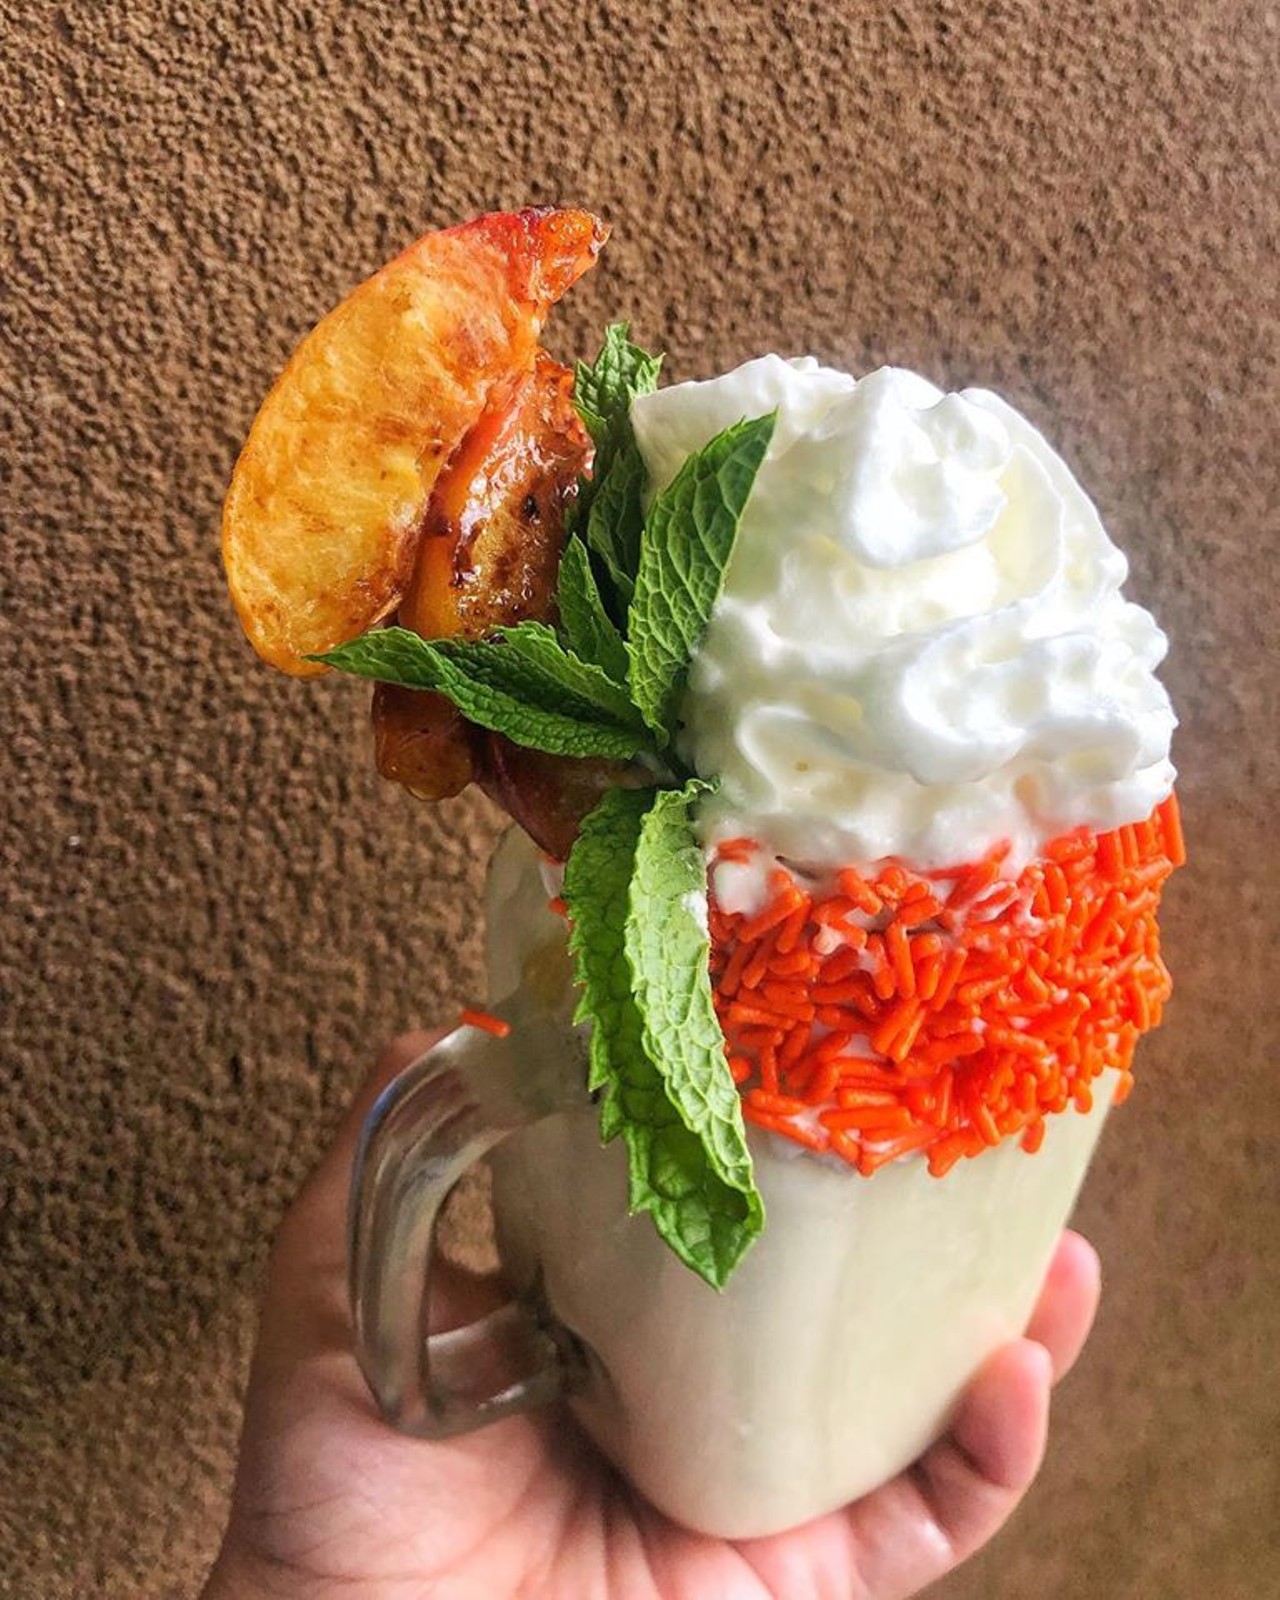 Last year, Milkshake Mode teamed up with Pallini Liqueur for United We Brunch, serving up these DELICIOUS peach bellini milkshakes.